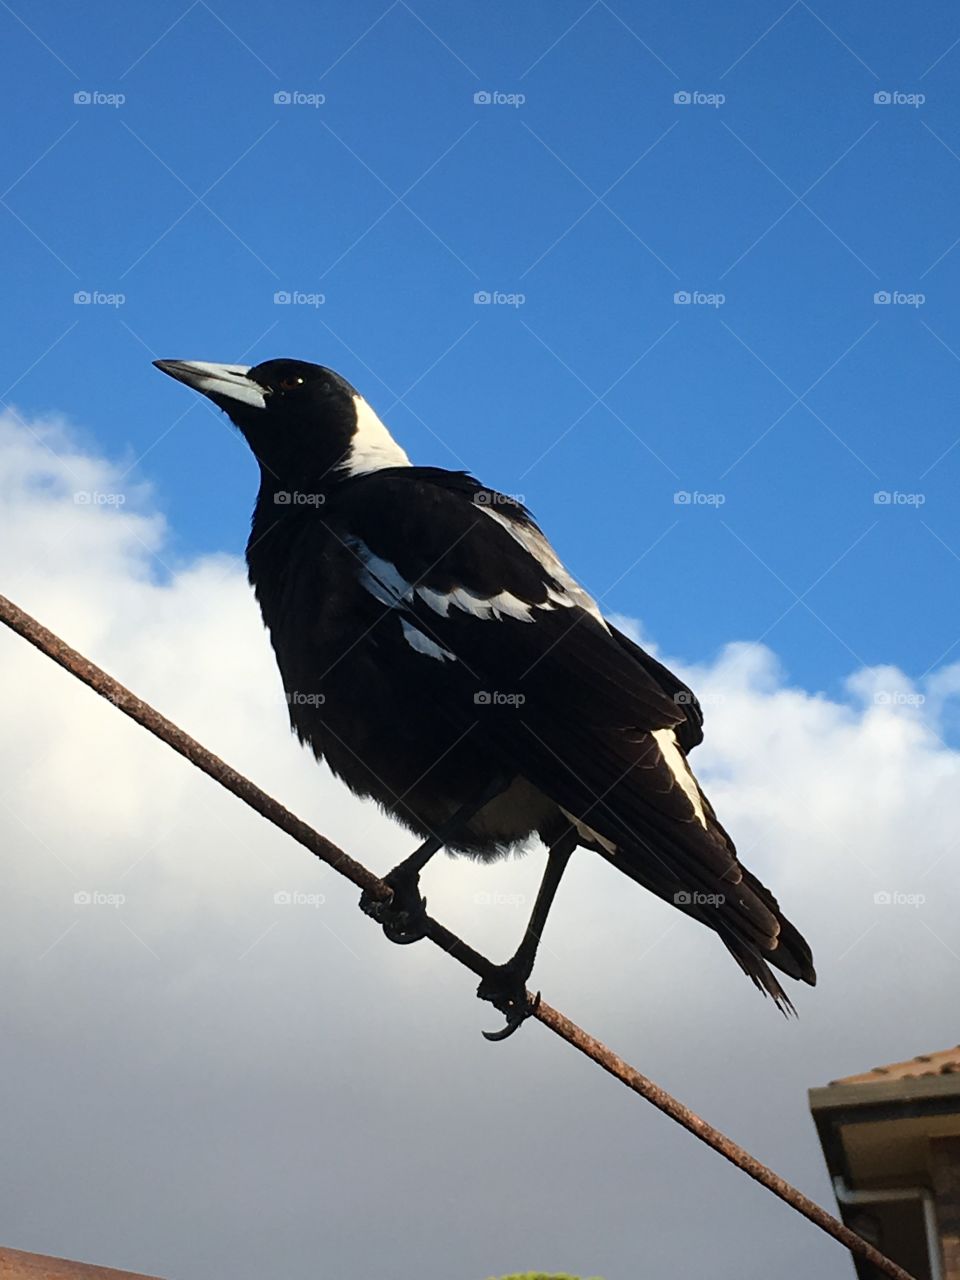 Black-and-white bird, Magpie perched on wire outdoors